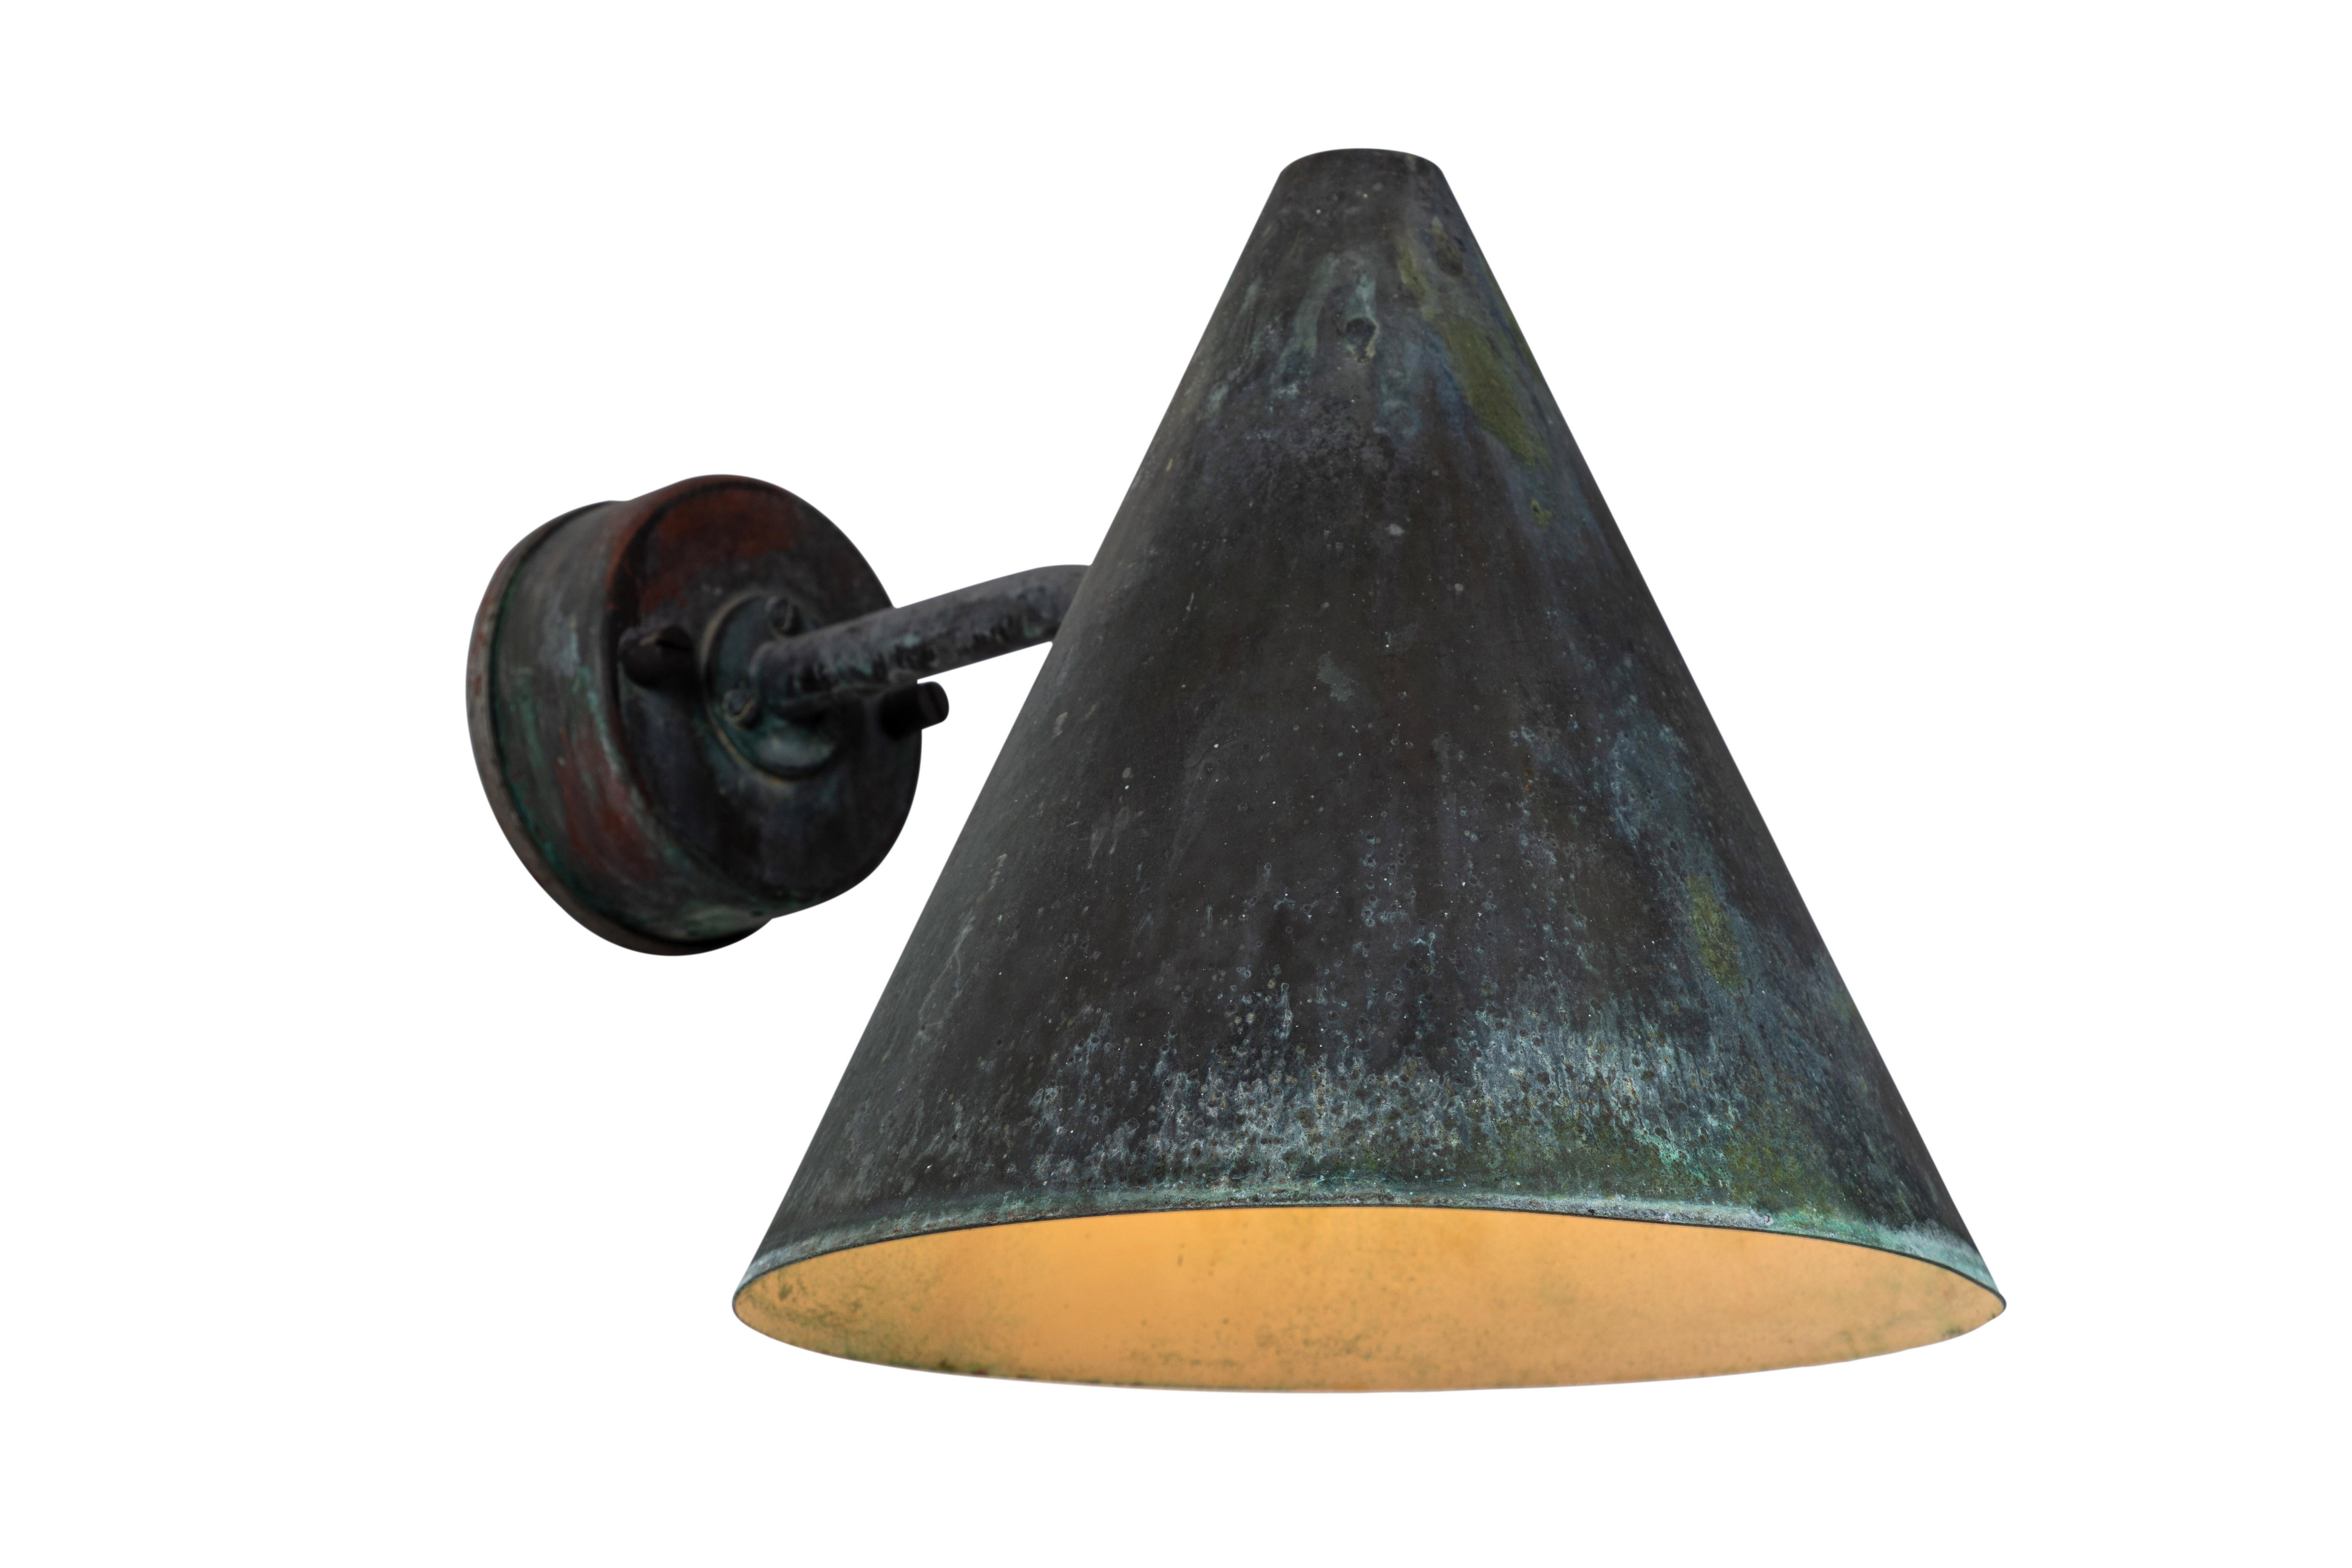 1950s Hans-Agne Jakobsson 'Tratten' outdoor sconces. Produced by AB in Markaryd, Sweden and executed in richly weathered patinated copper. An incredibly refined vintage design that is quintessentially Scandinavian.

Price is per item. 3 lamps